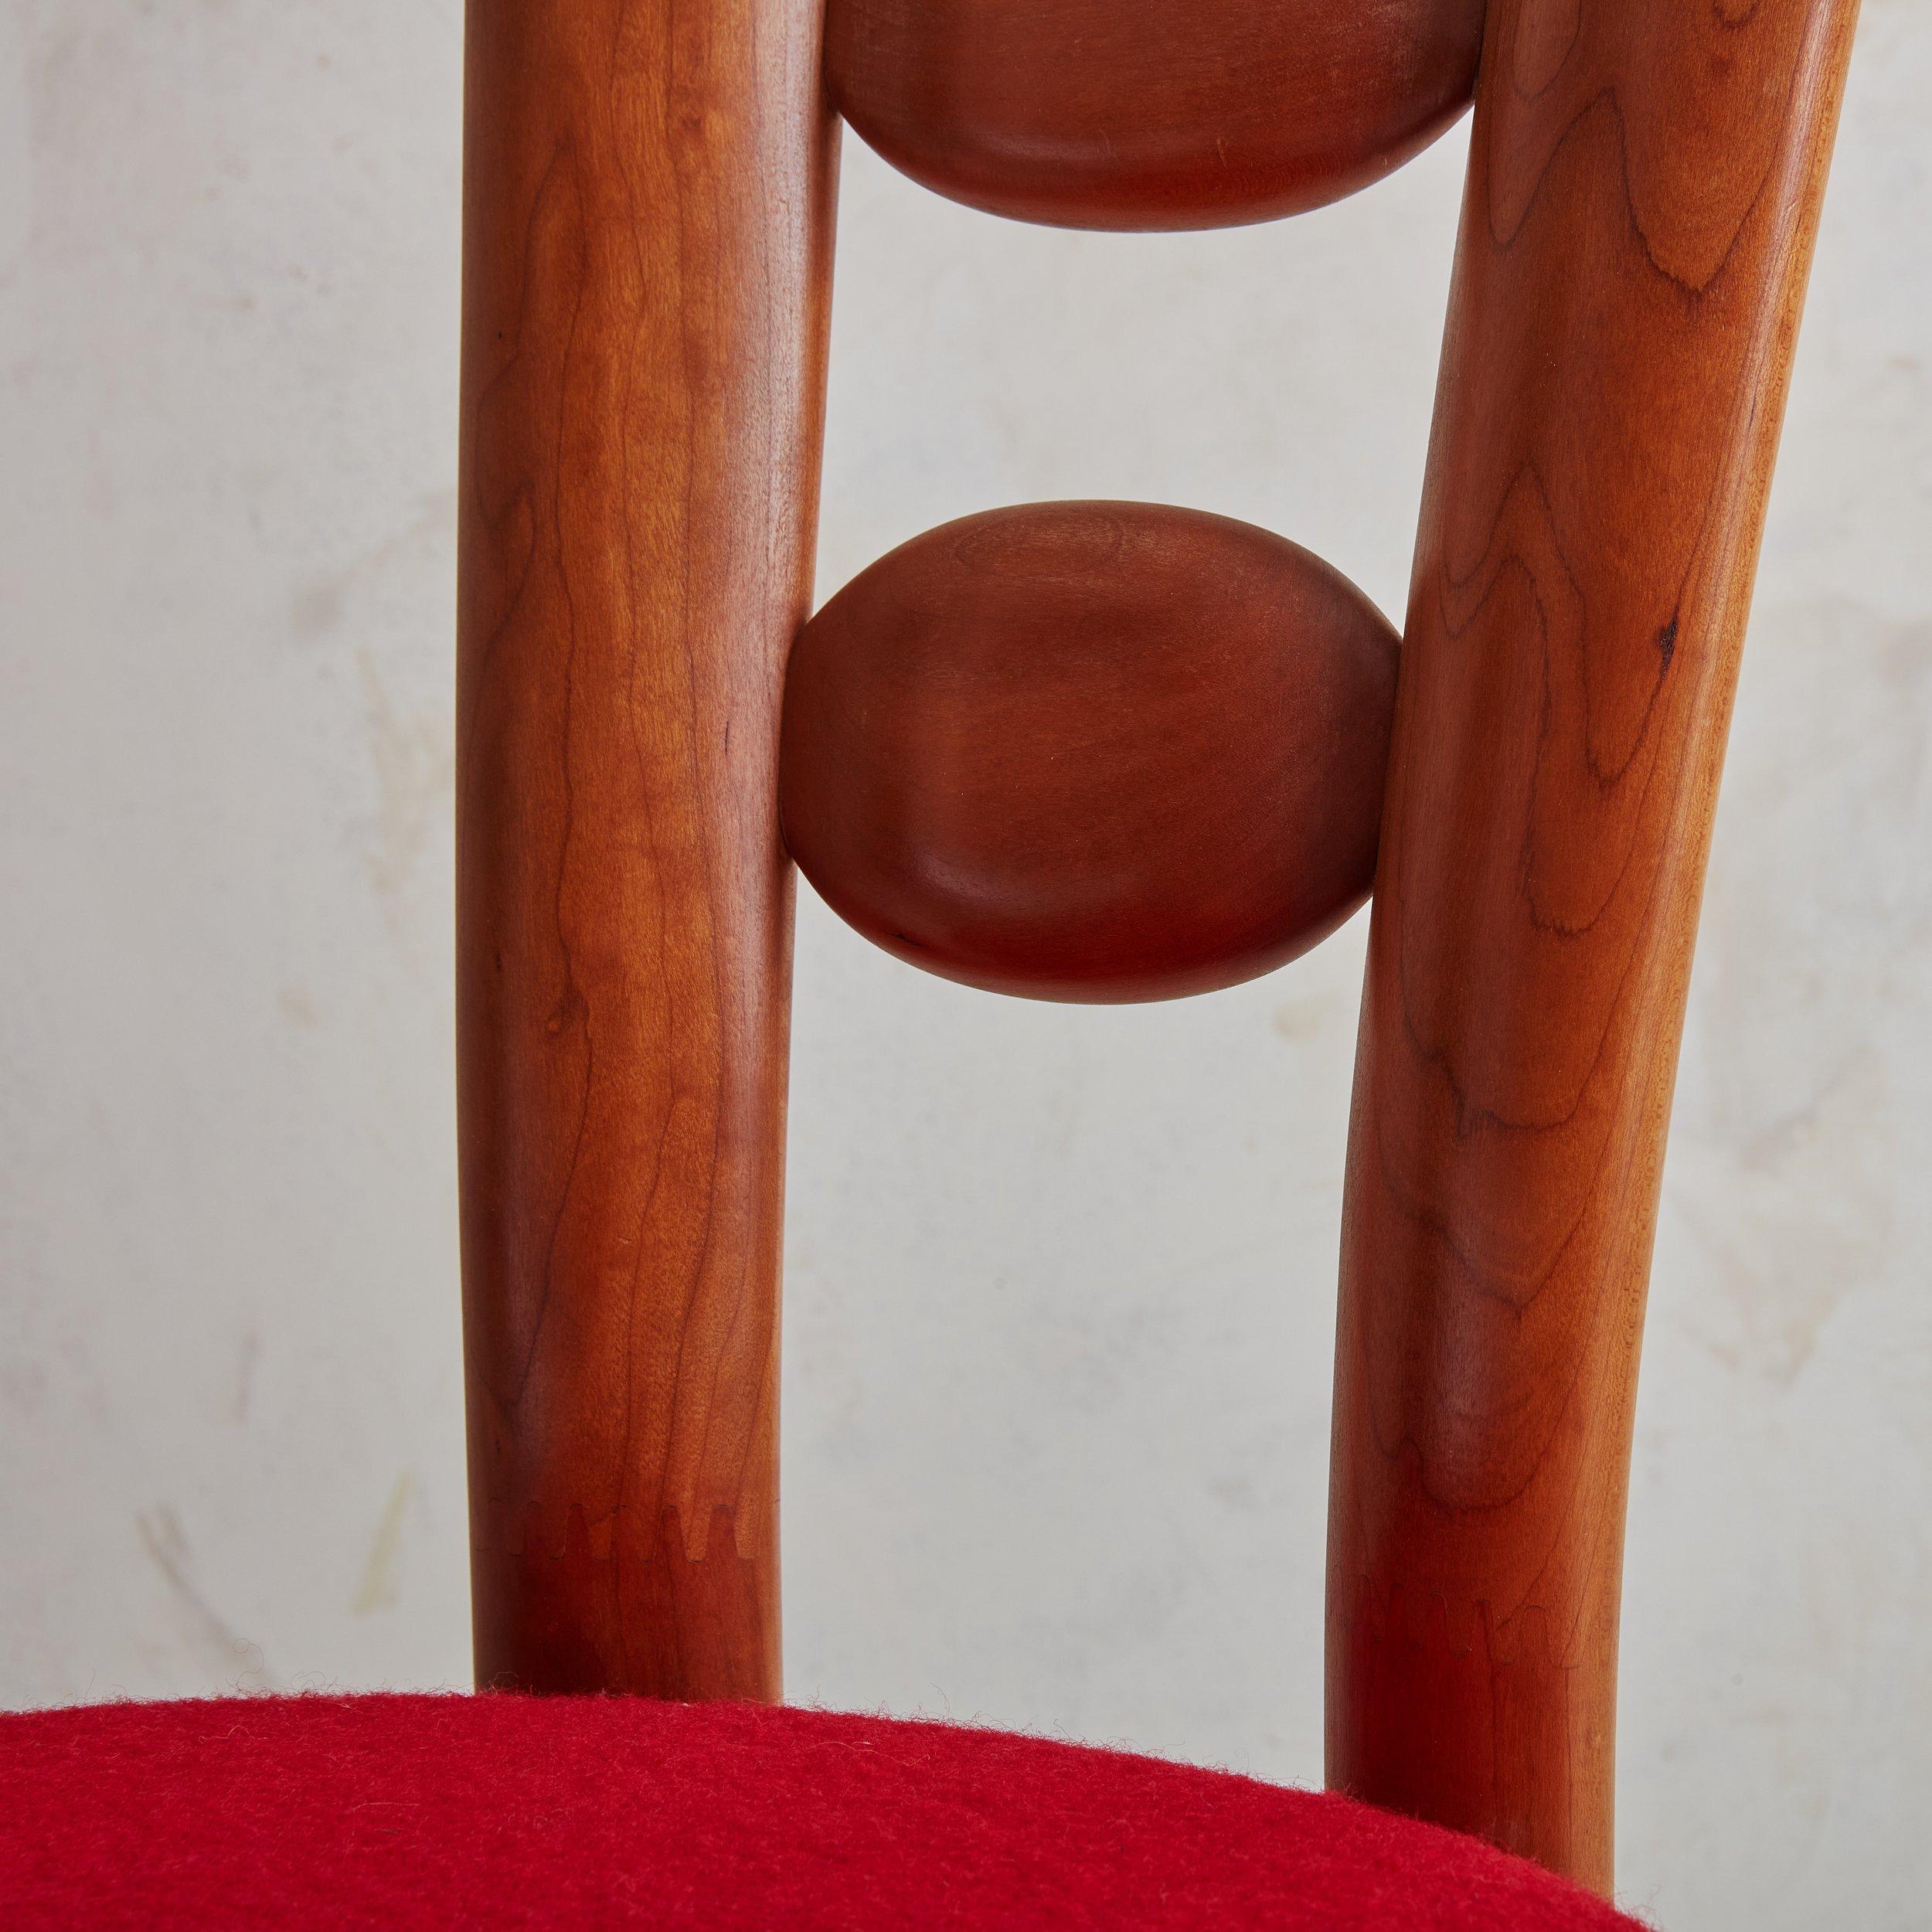 Set of 4 Teak Dining Chairs, Denmark 1960s For Sale 2